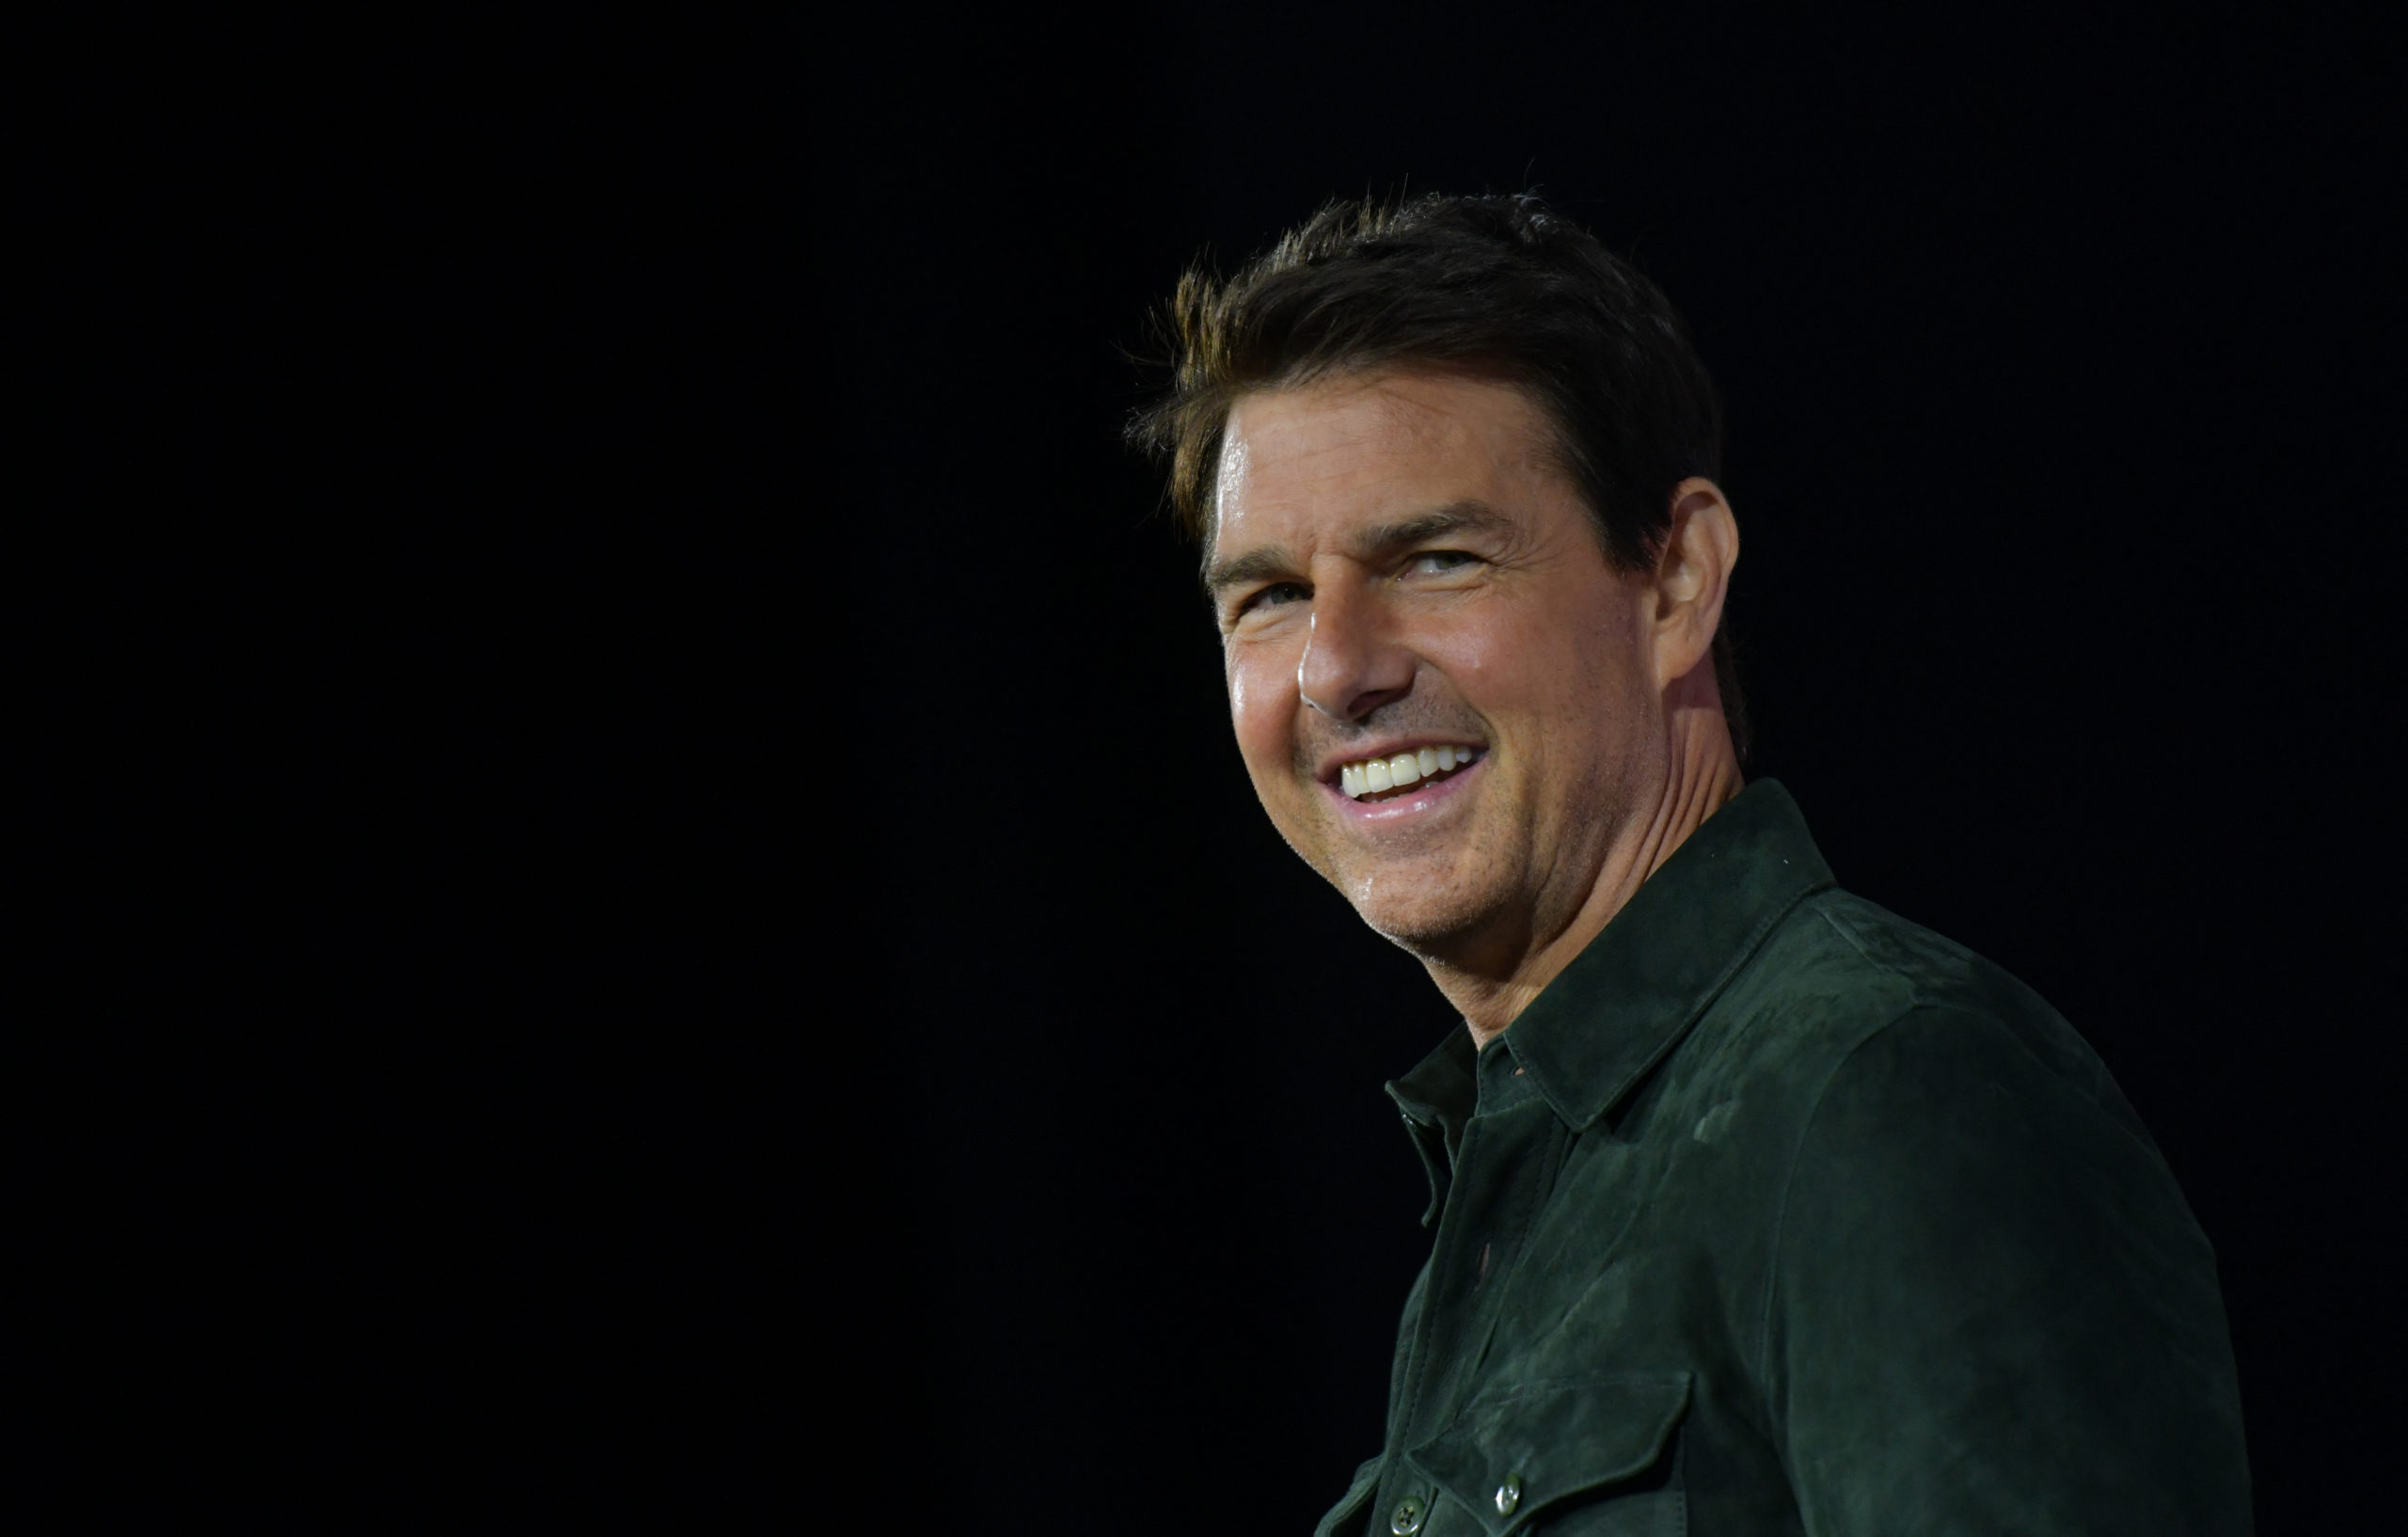 In this file photo taken on July 18, 2019 Actor Tom Cruise makes a surprise appearance in Hall H to promote Top Gun: Maverick  at the Convention Center during Comic Con in San Diego, California. - Tom Cruise unveiled the world-first screening of "Top Gun: Maverick" at CinemaCon in Las Vegas Thursday -- introducing the long-awaited sequel while balanced atop a flying bi-plane. The new "Top Gun," which picks up the story of Maverick and his fighter pilot buddies some three decades after the blockbuster original, was scheduled to open in 2020 but was repeatedly delayed by the Covid-19 pandemic. (Photo by Chris Delmas / AFP)